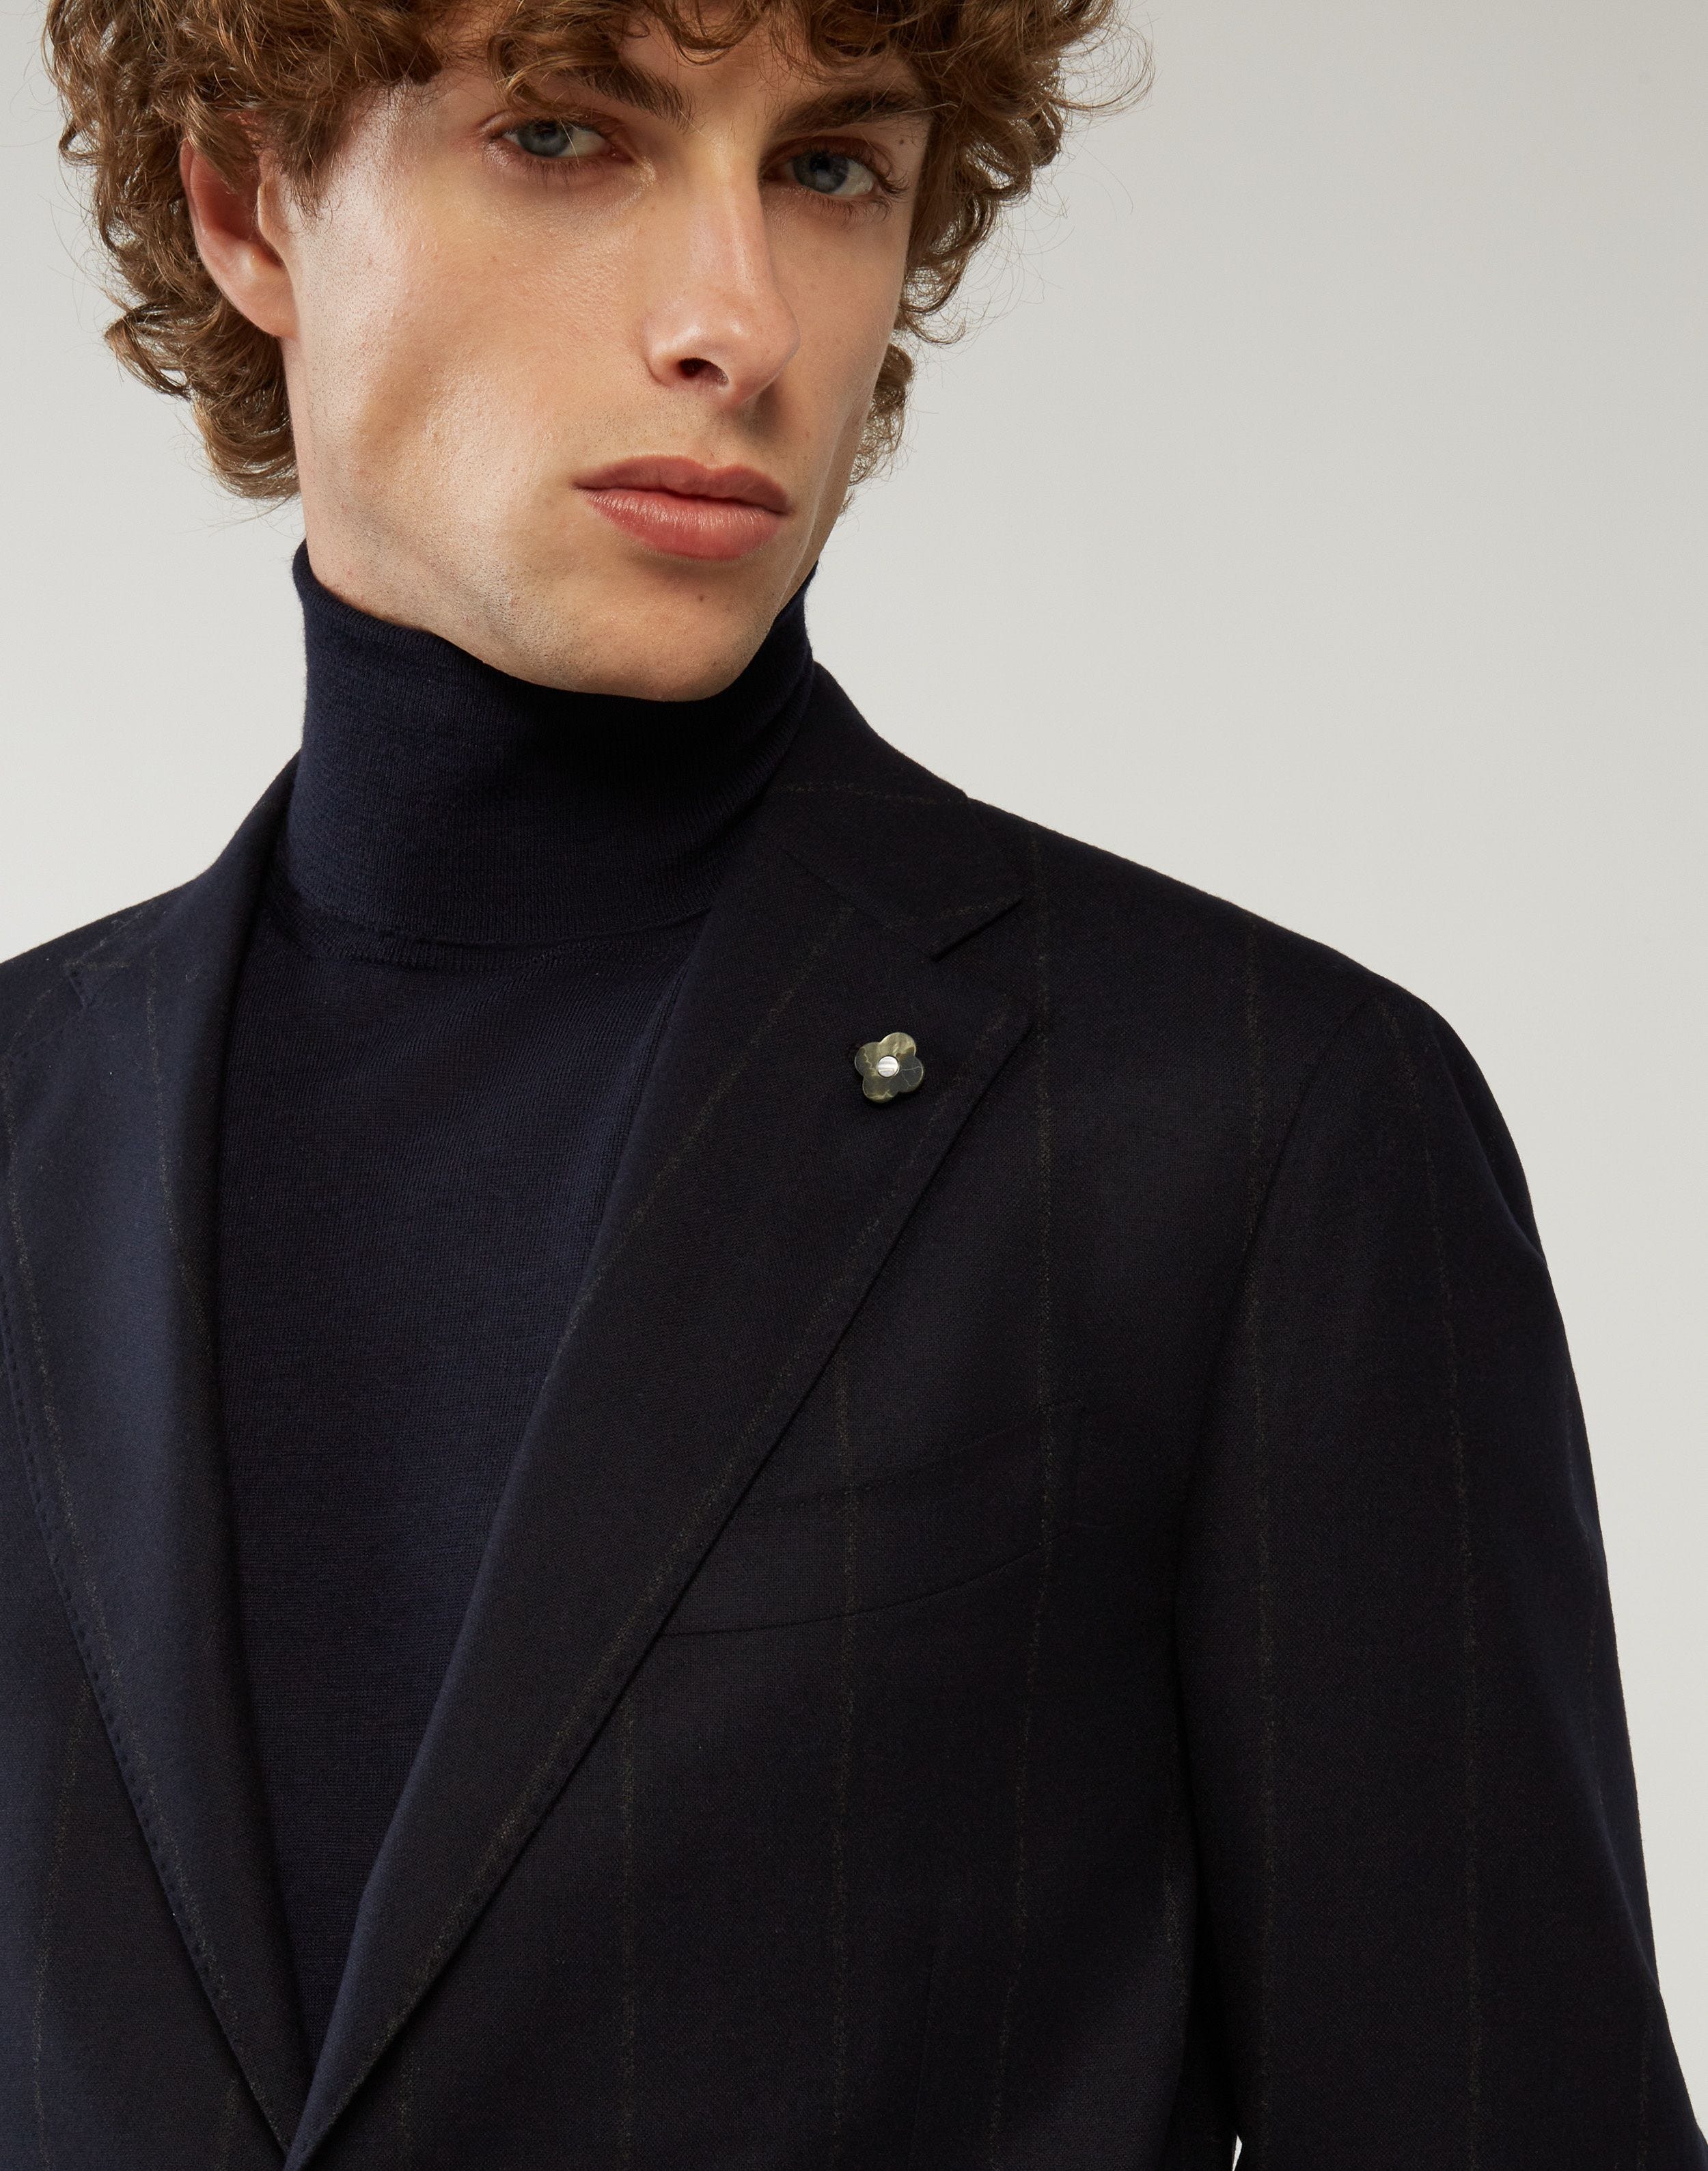 Blue pinstripe suit in wool and cashmere - Supersoft